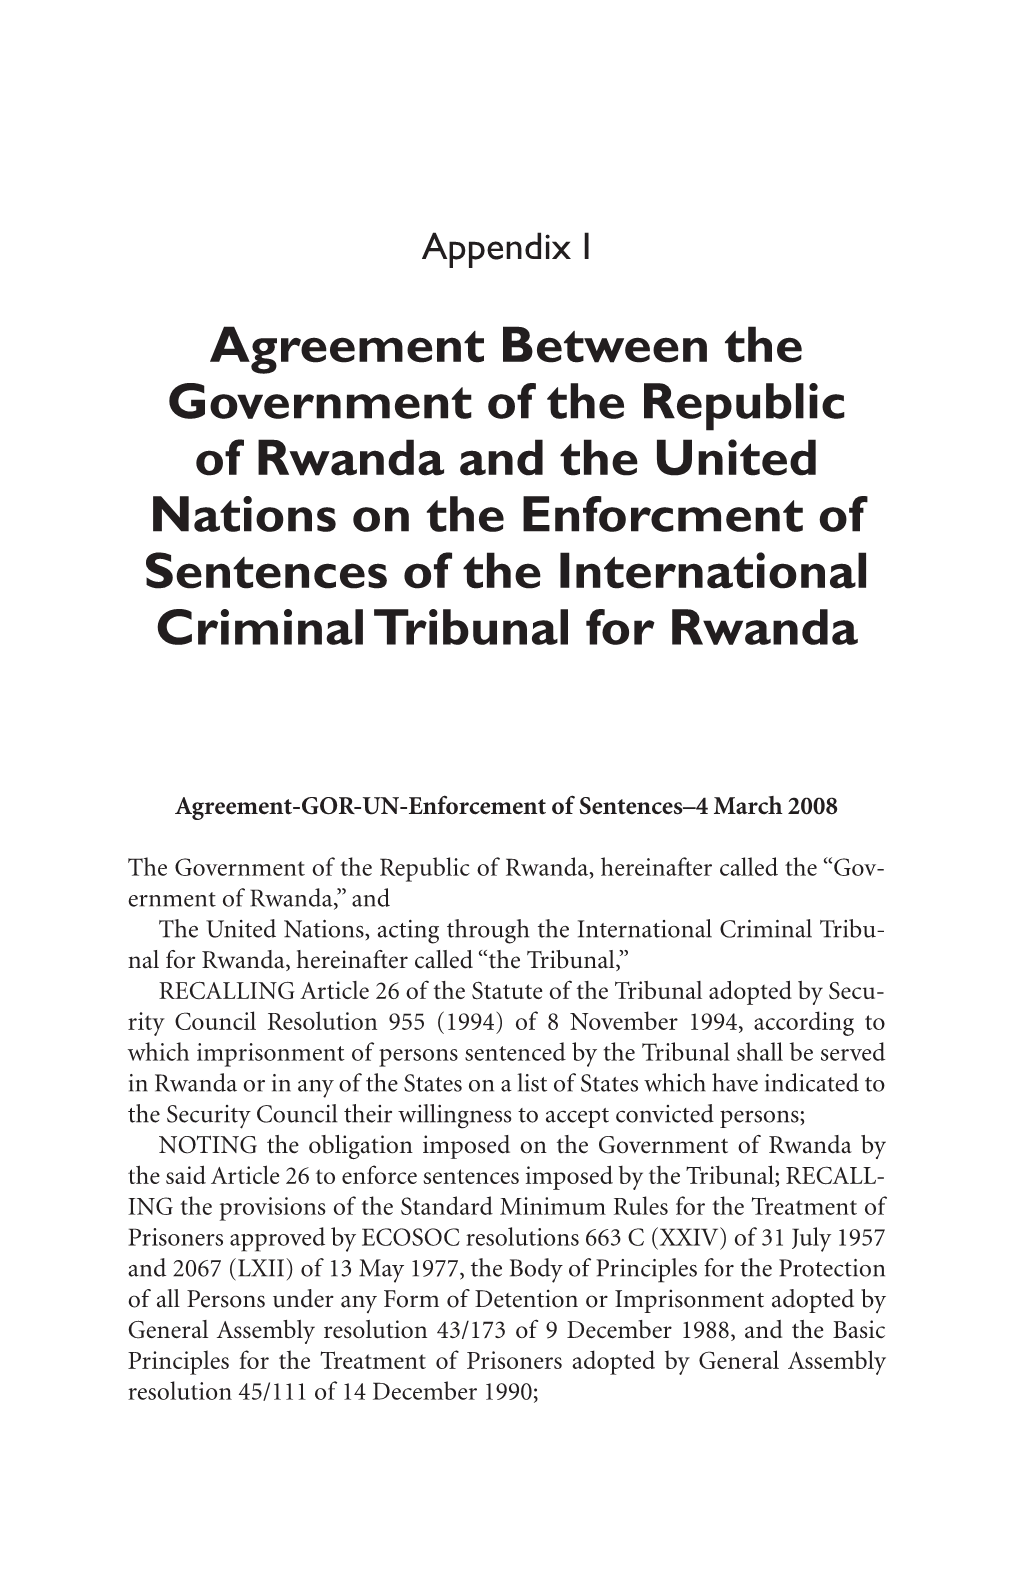 Agreement Between the Government of the Republic of Rwanda and the United Nations on the Enforcment of Sentences of the International Criminal Tribunal for Rwanda